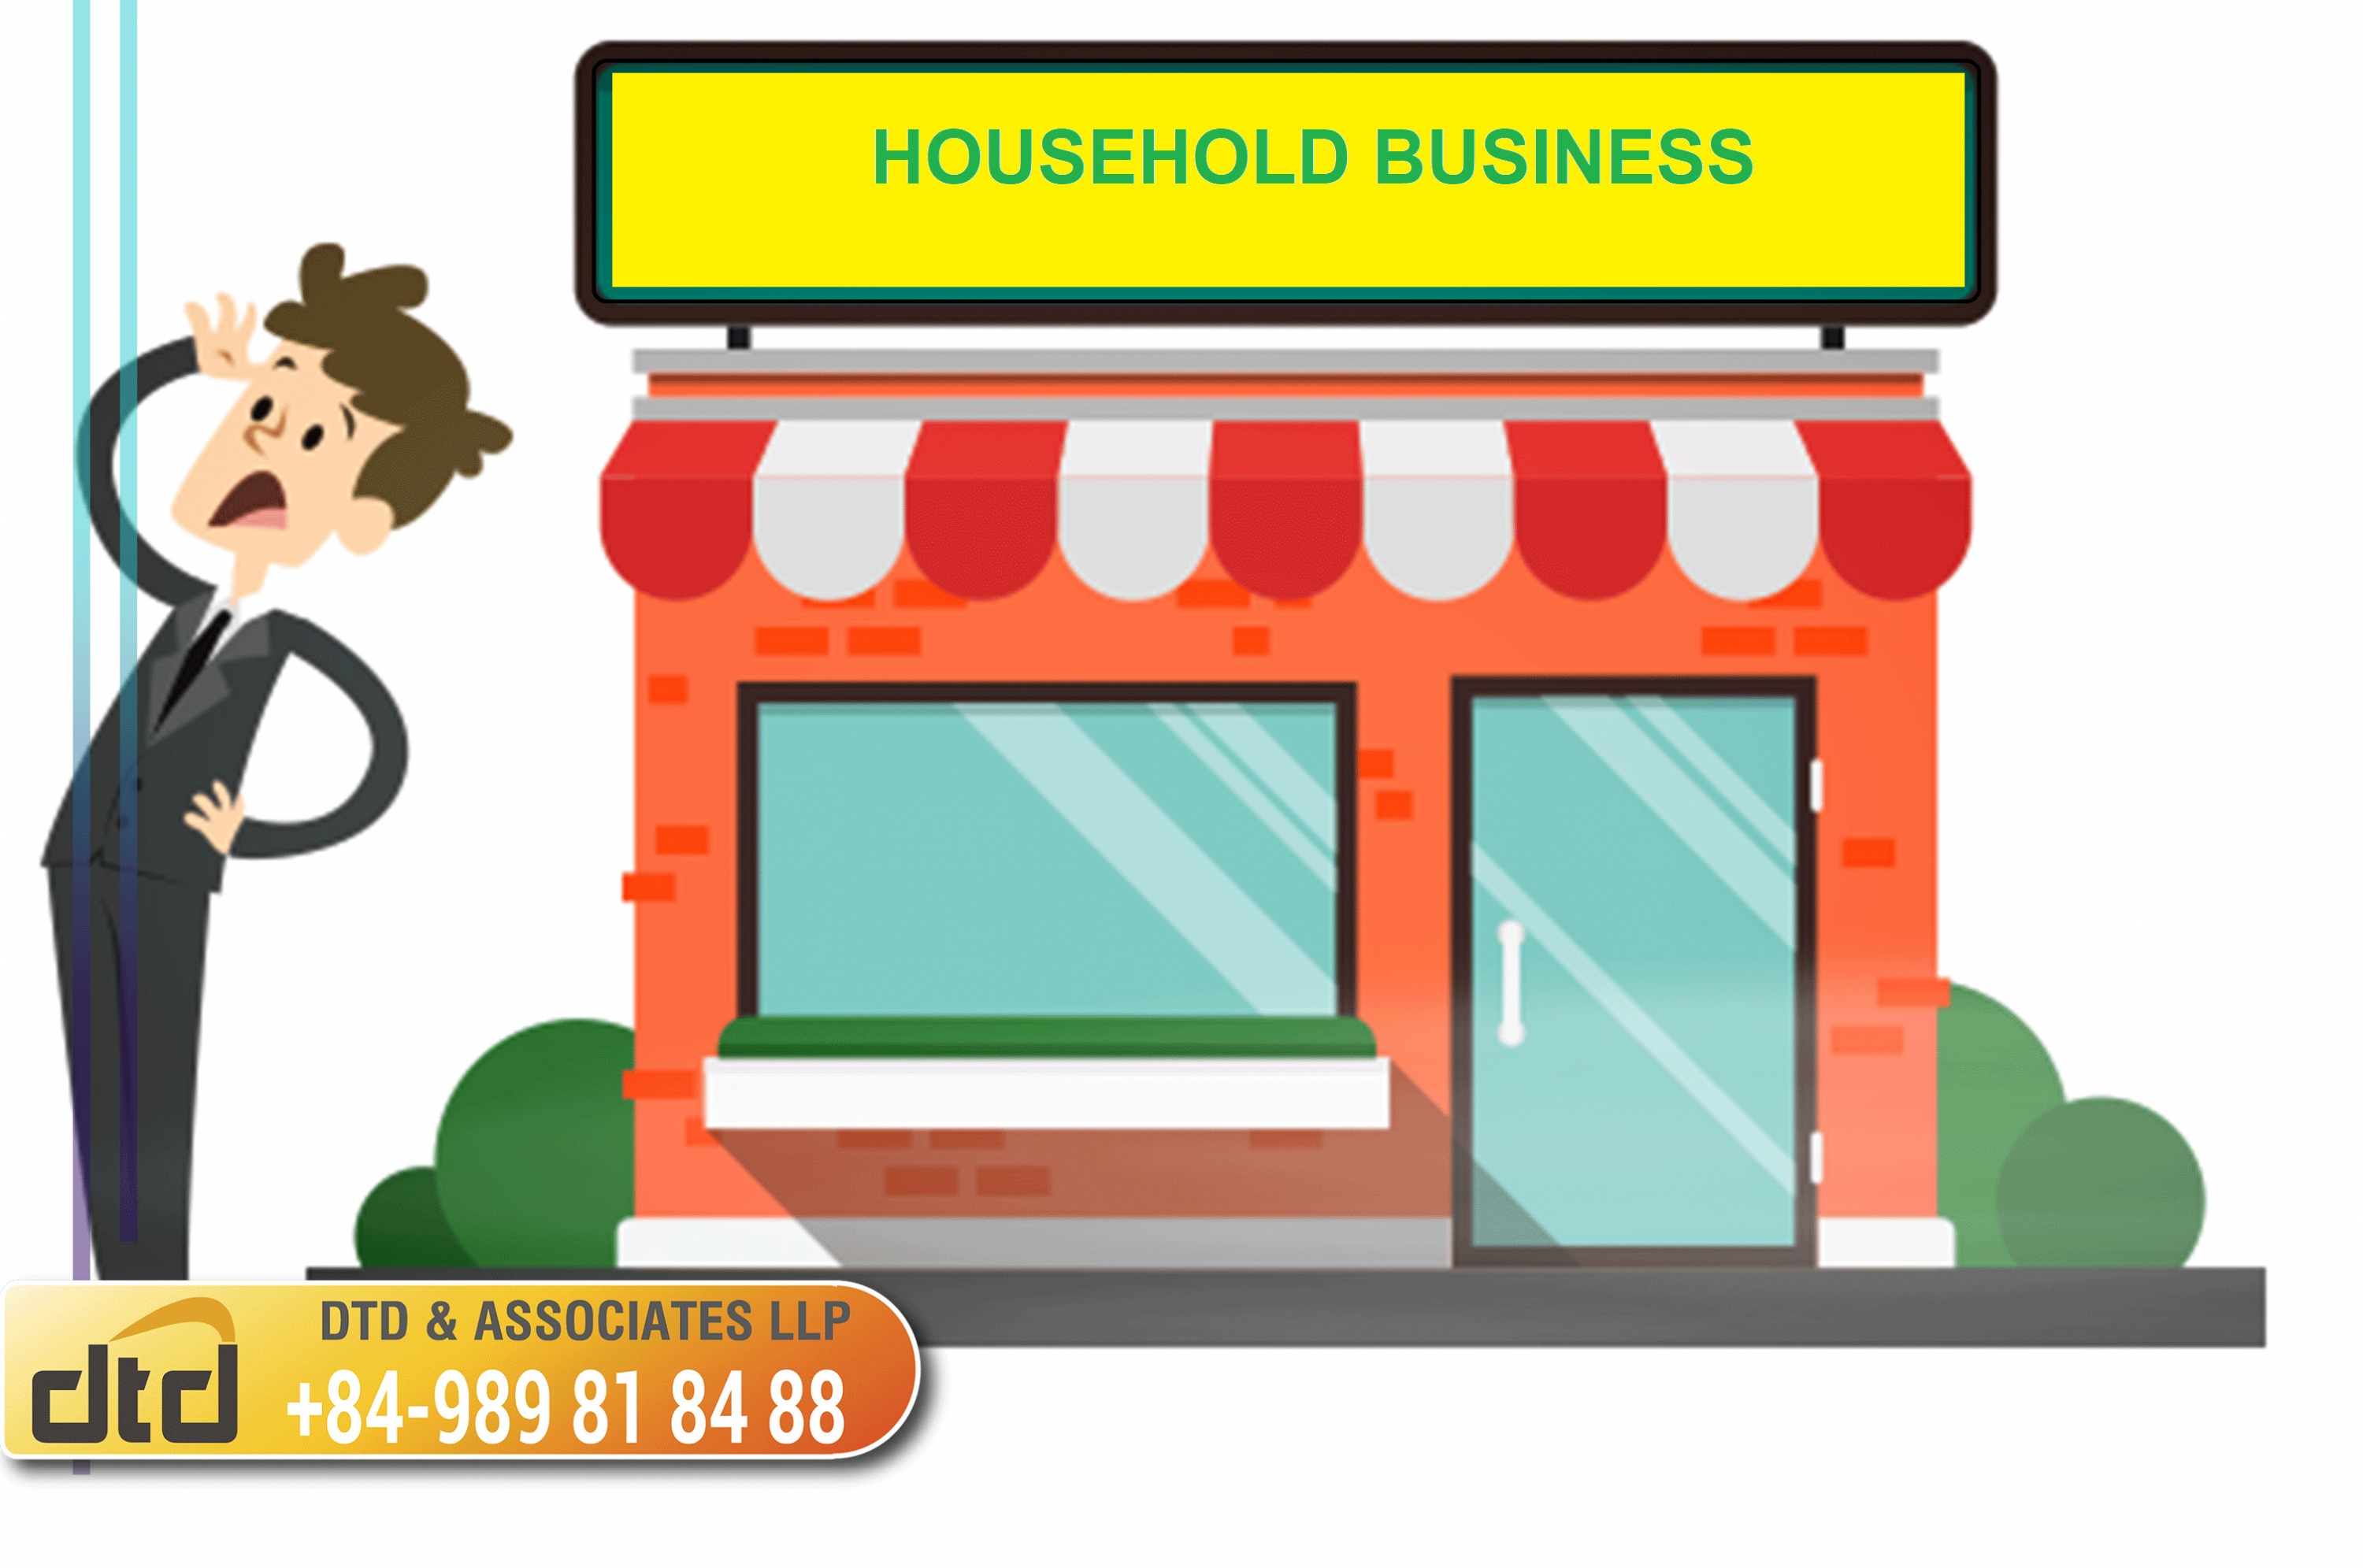 Is a household business allowed to operate  in many different locations?